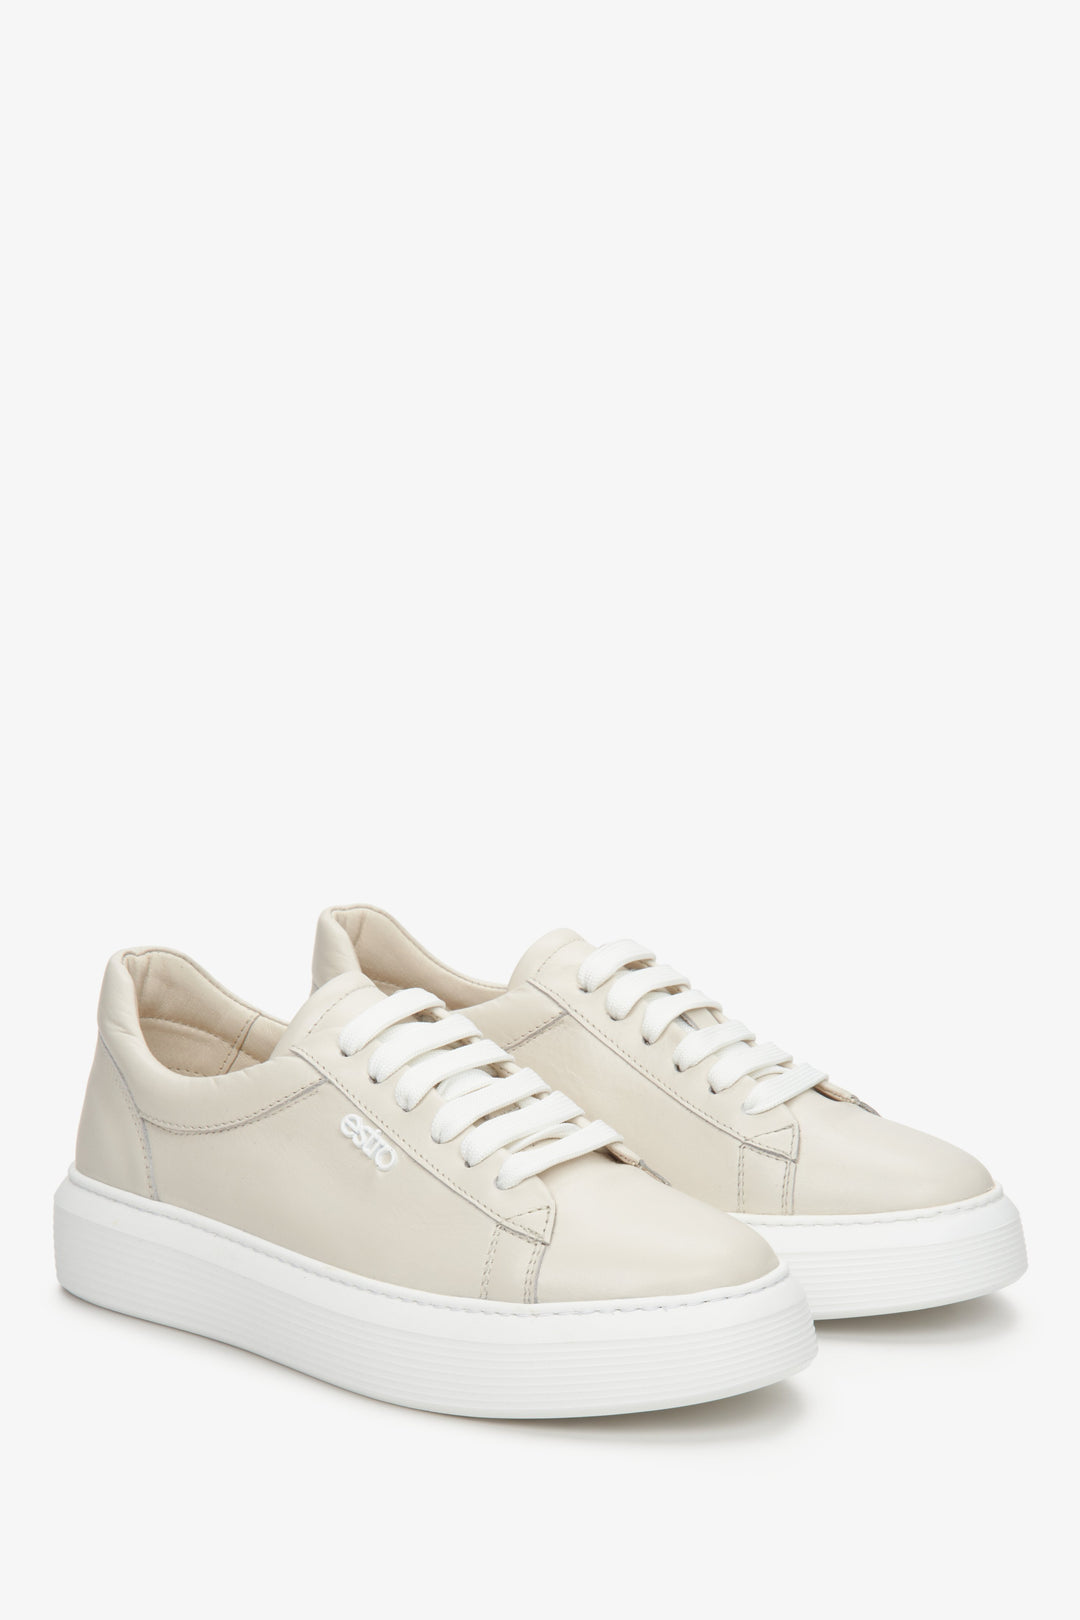 Estro women's sneakers in a light beige color made of genuine leather for spring and autumn - presentation of the shoe's toe and side line.